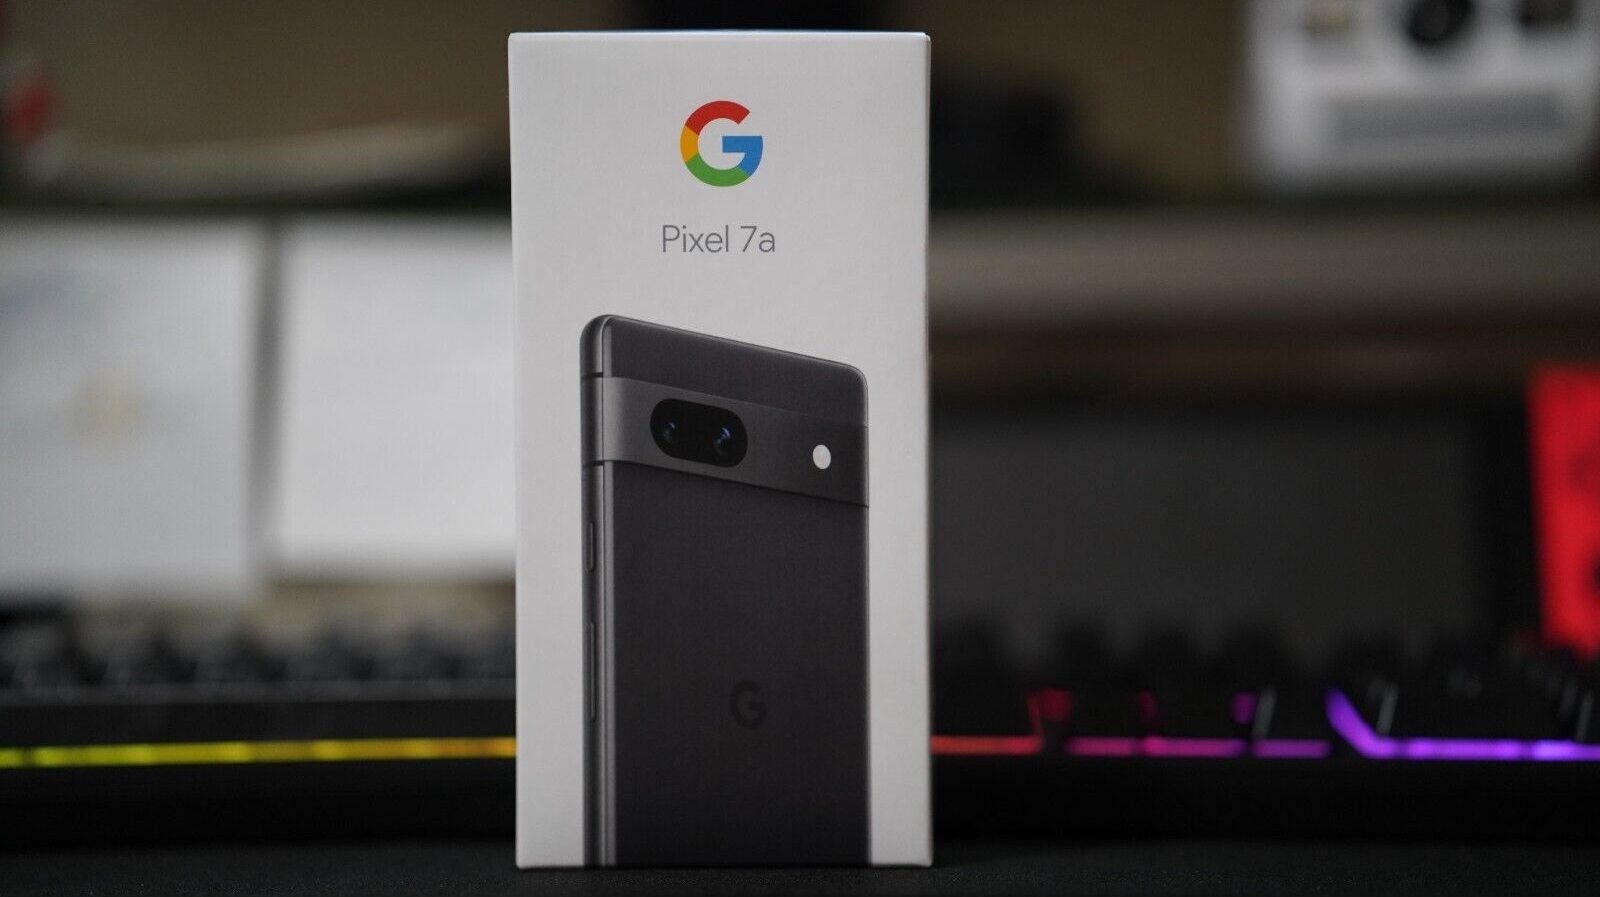 An early eBay listing image for the Pixel 7a